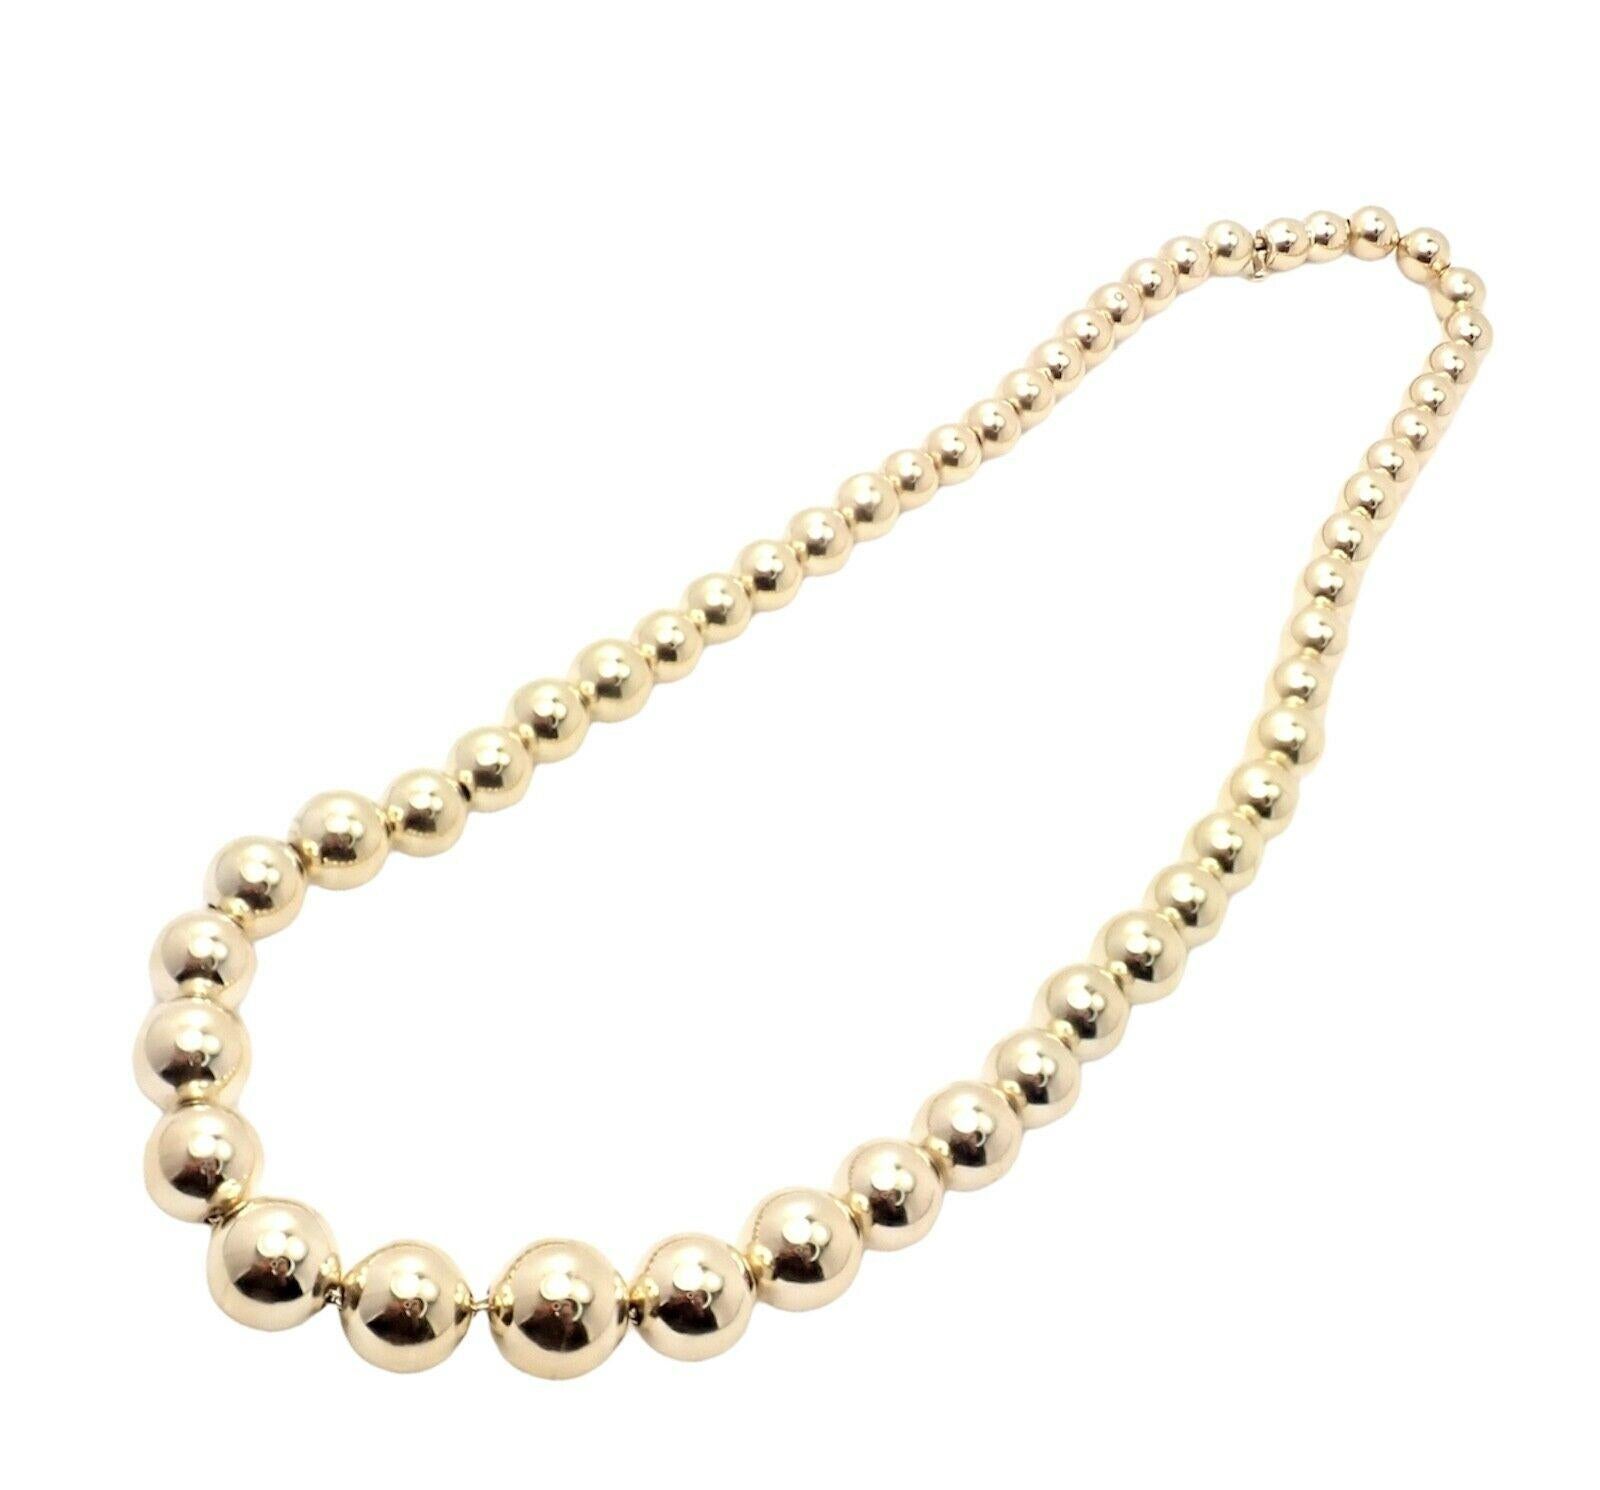 14k Yellow Gold Graduated Bead Necklace by Tiffany & Co.
Details:
Length: 16